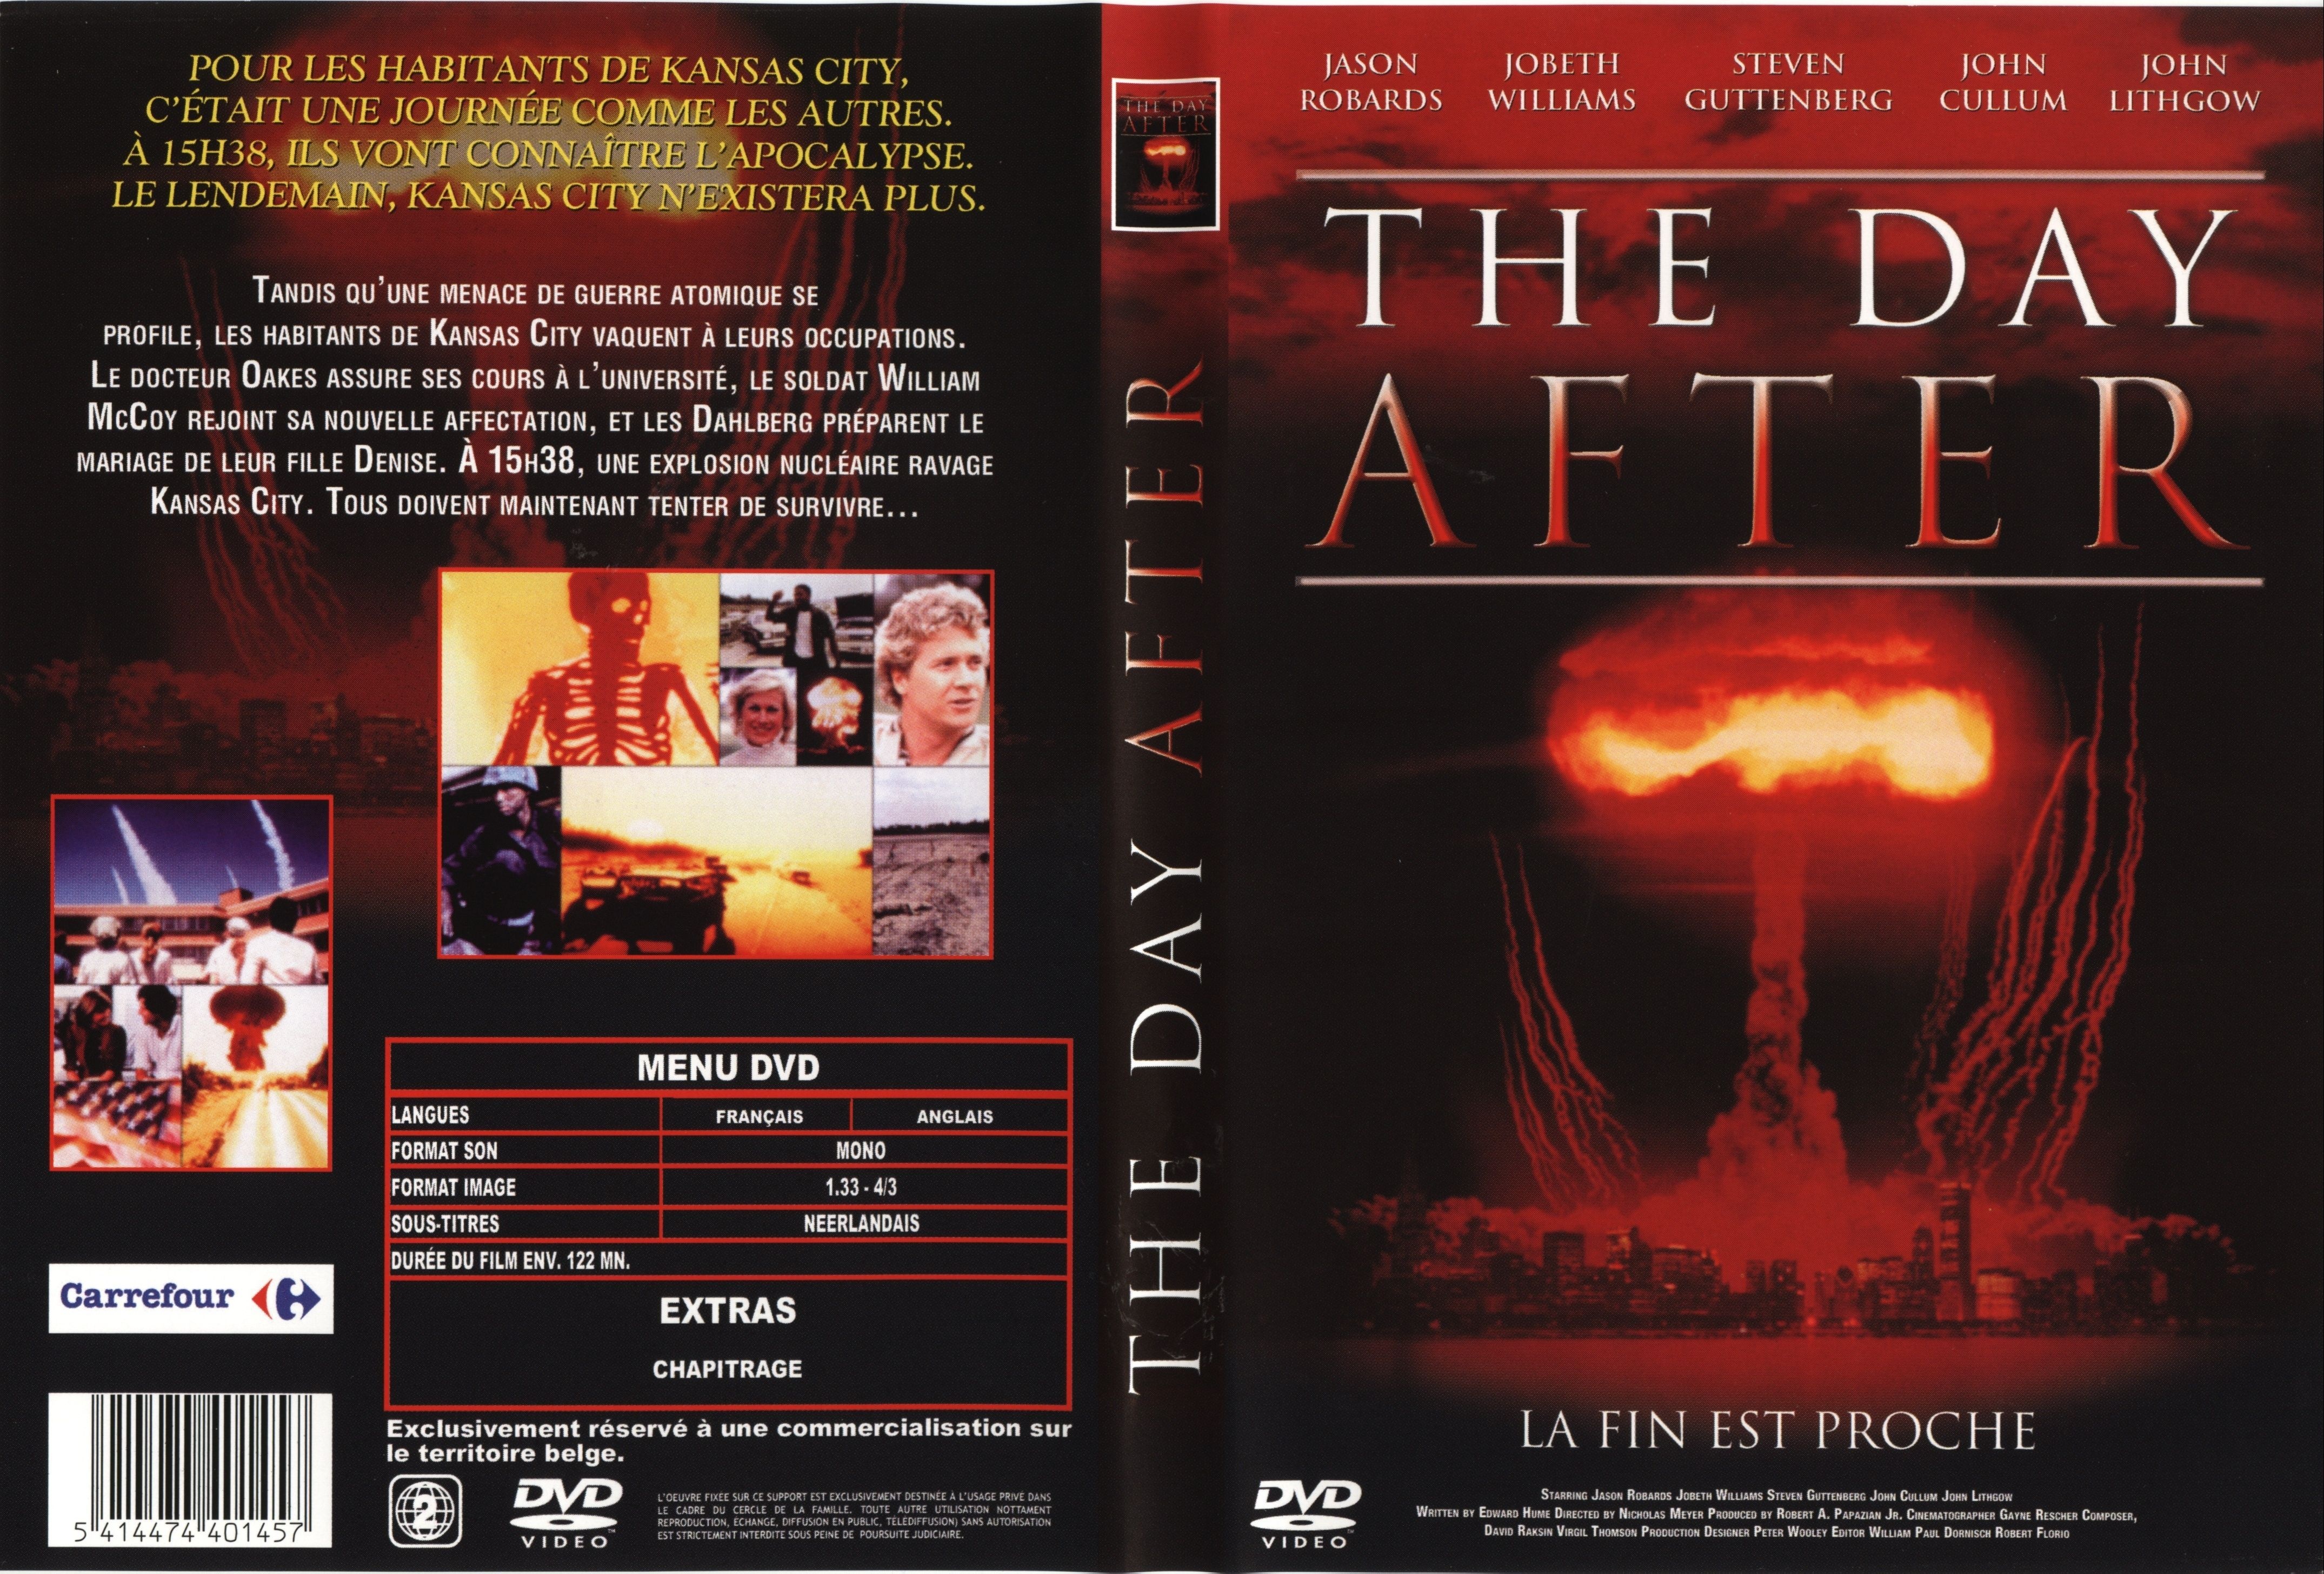 Jaquette DVD The day after